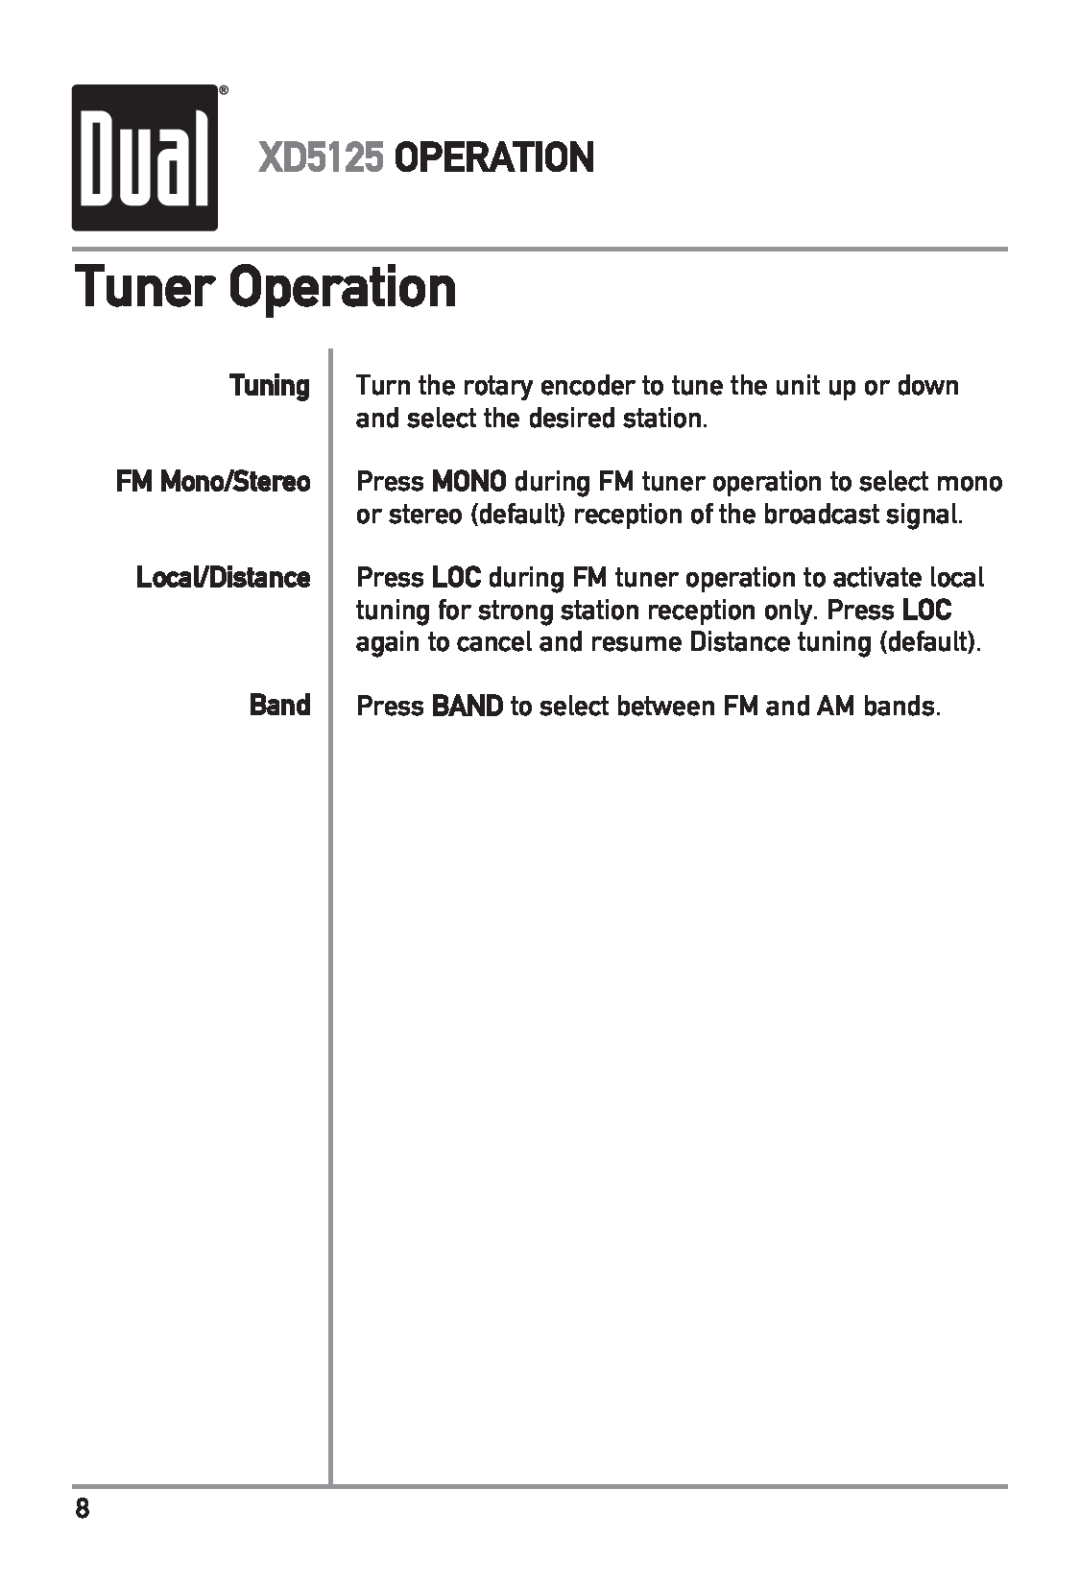 Dual owner manual Tuner Operation, XD5125 OPERATION, Tuning FM Mono/Stereo Local/Distance Band 